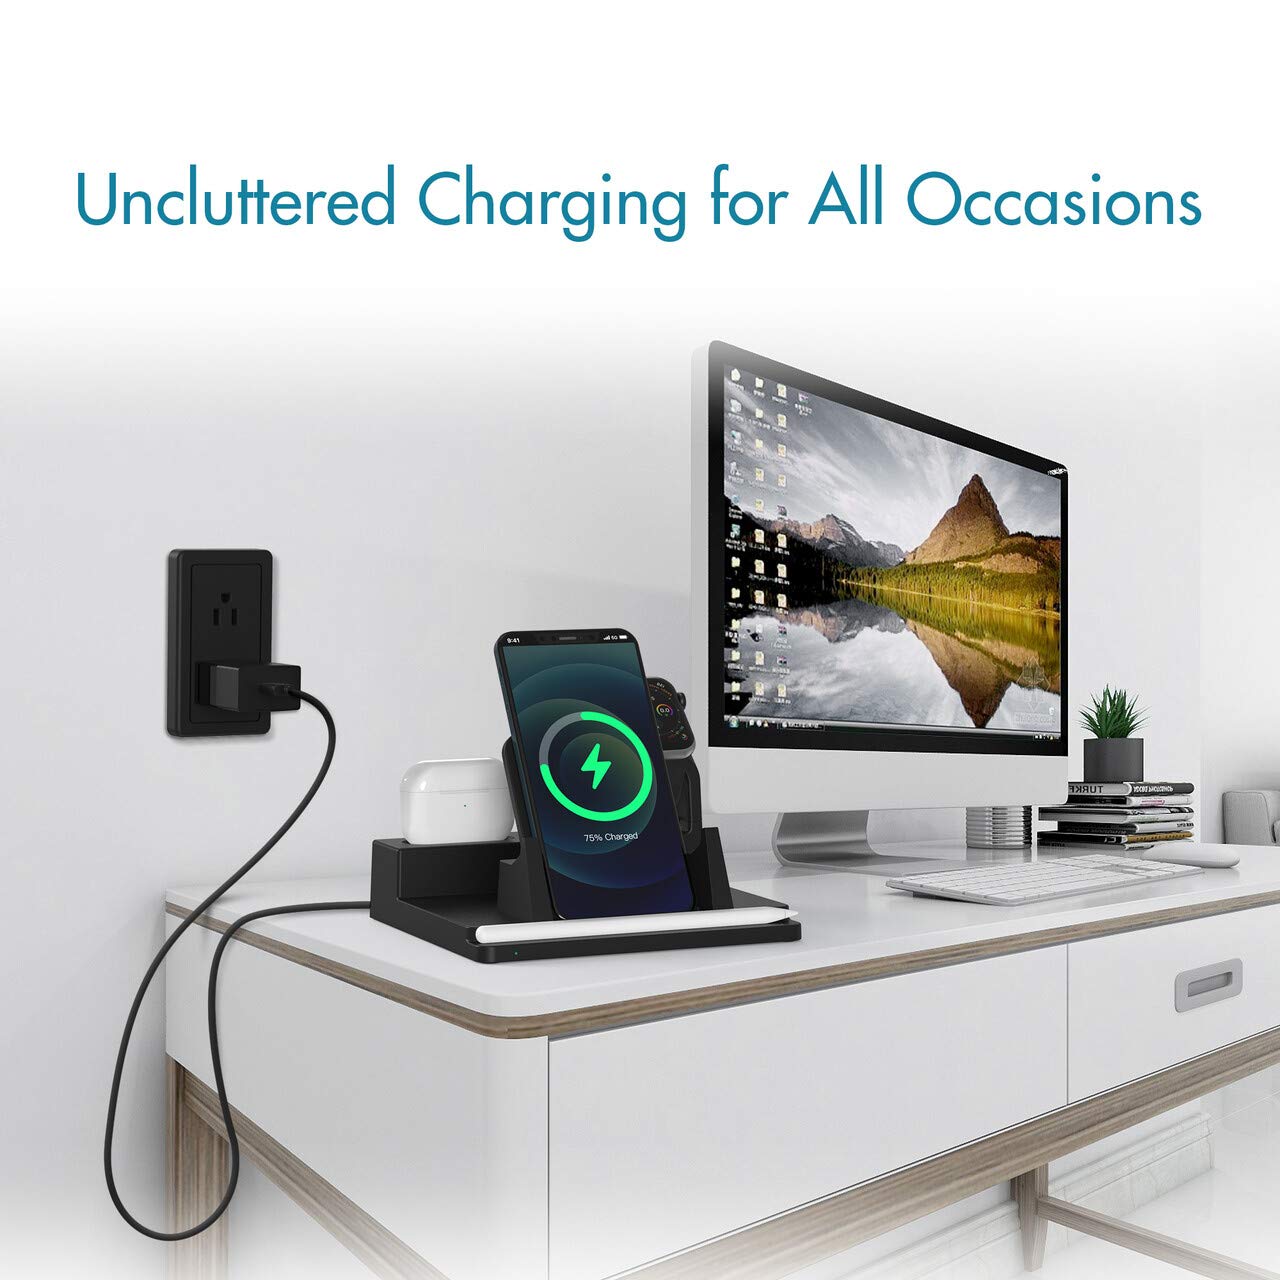 Wireless Charger for Multiple Devices, 4-in-1 Qi-Certified 15W Fast Wireless Charging Station Compatible with iPhone 11/11Pro/11Pro Max/X, AirPods, Apple Pencil & Apple Watch (No Watch Charger)